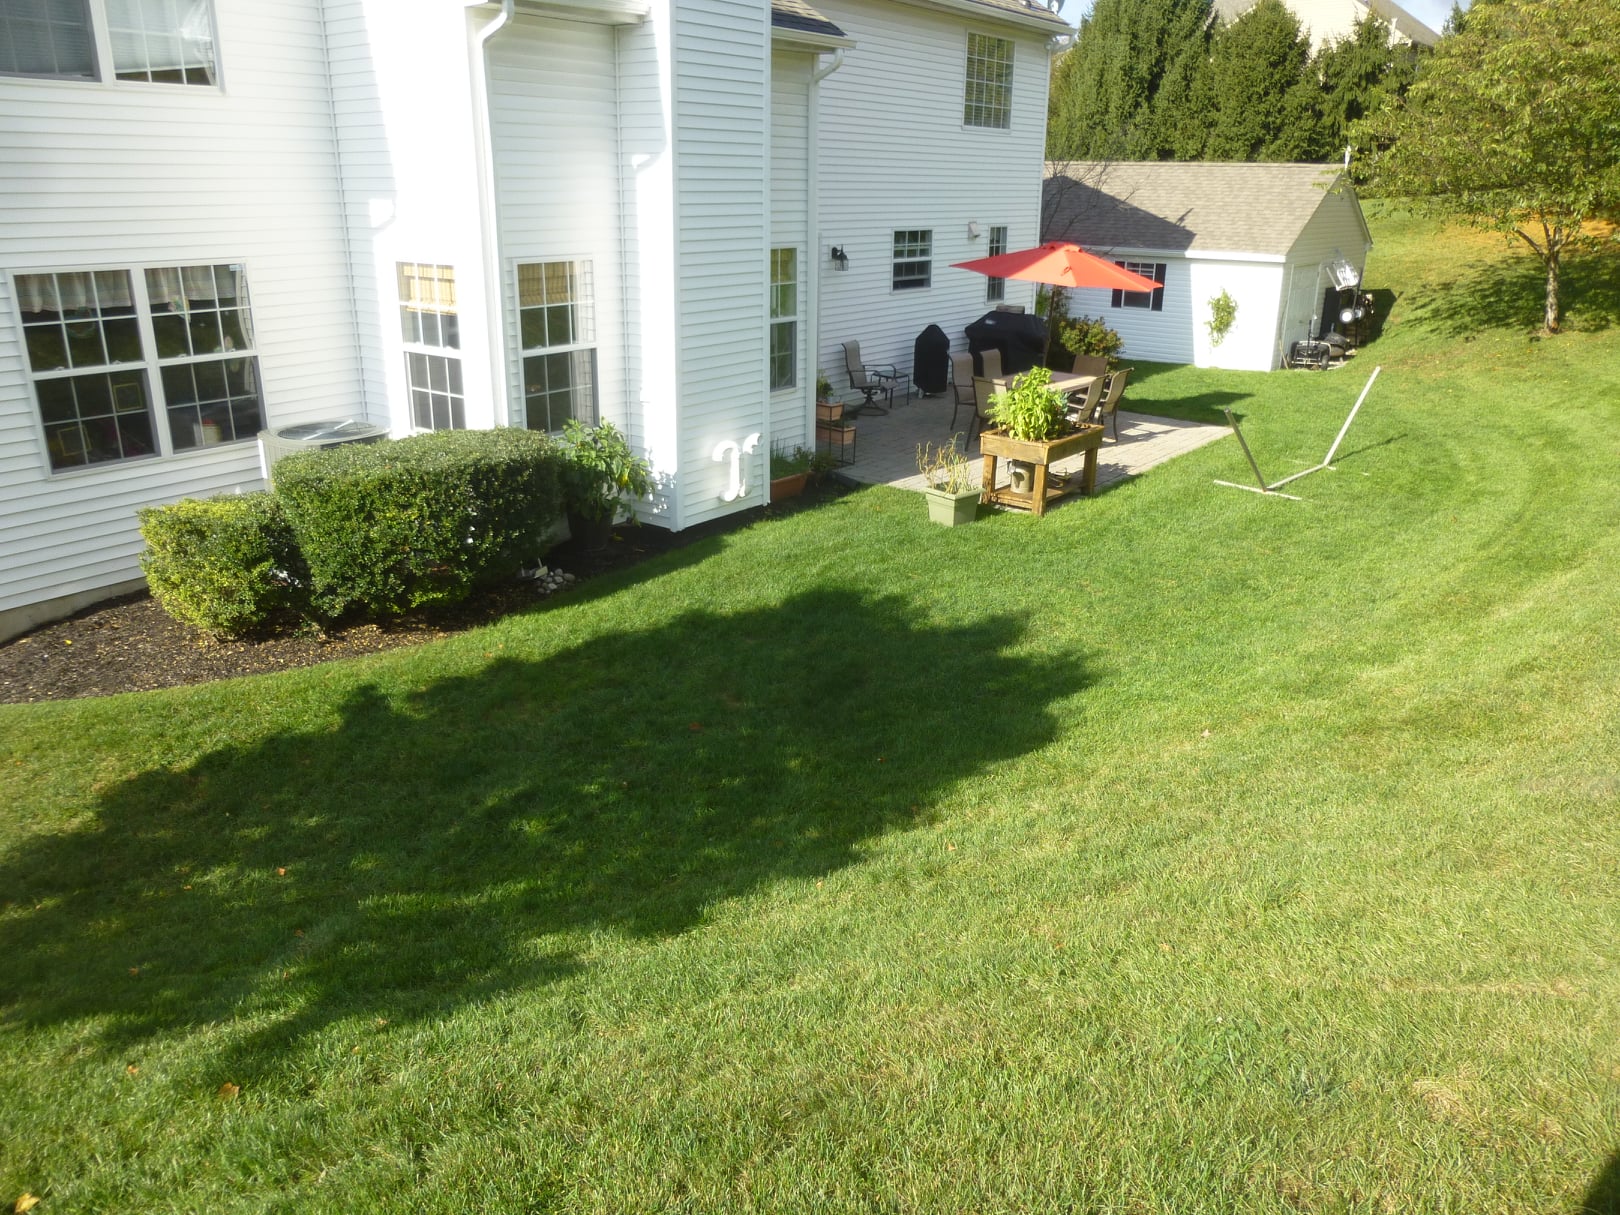 Before image of home backyard before work with thick and dry grass.